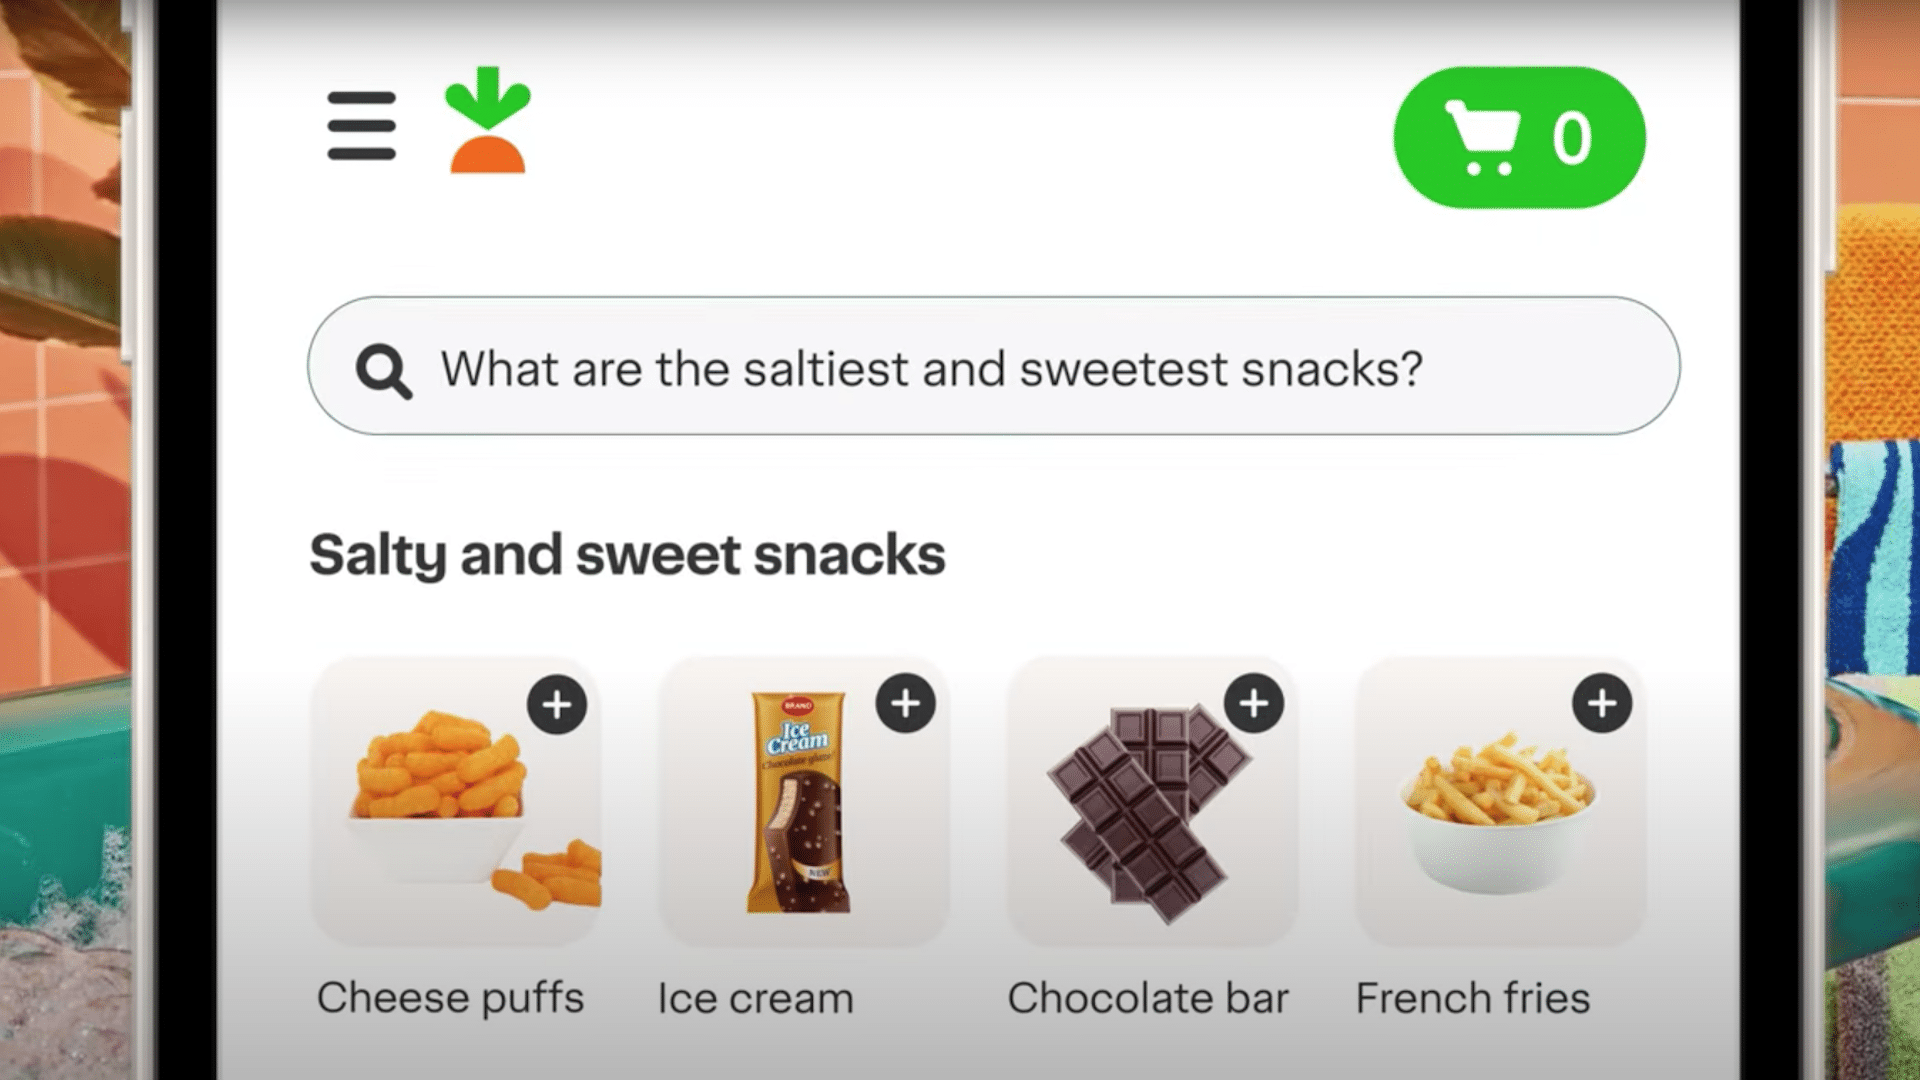 Ask Instacart brings generative AI to Instacart’s search experience